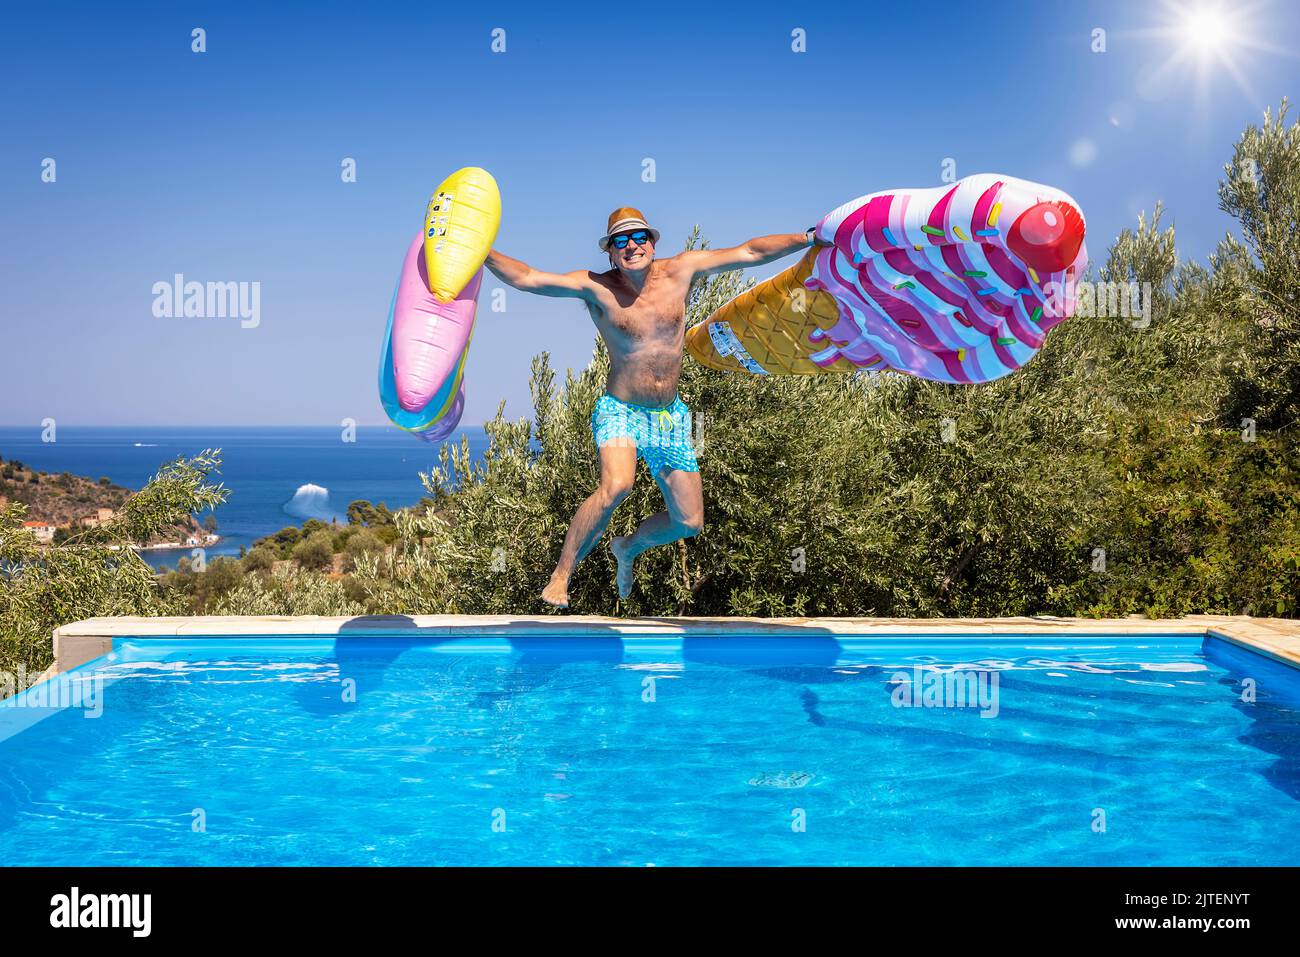 Summer concept with a happy holiday man with hat and sunglasses jumping in the pool Stock Photo